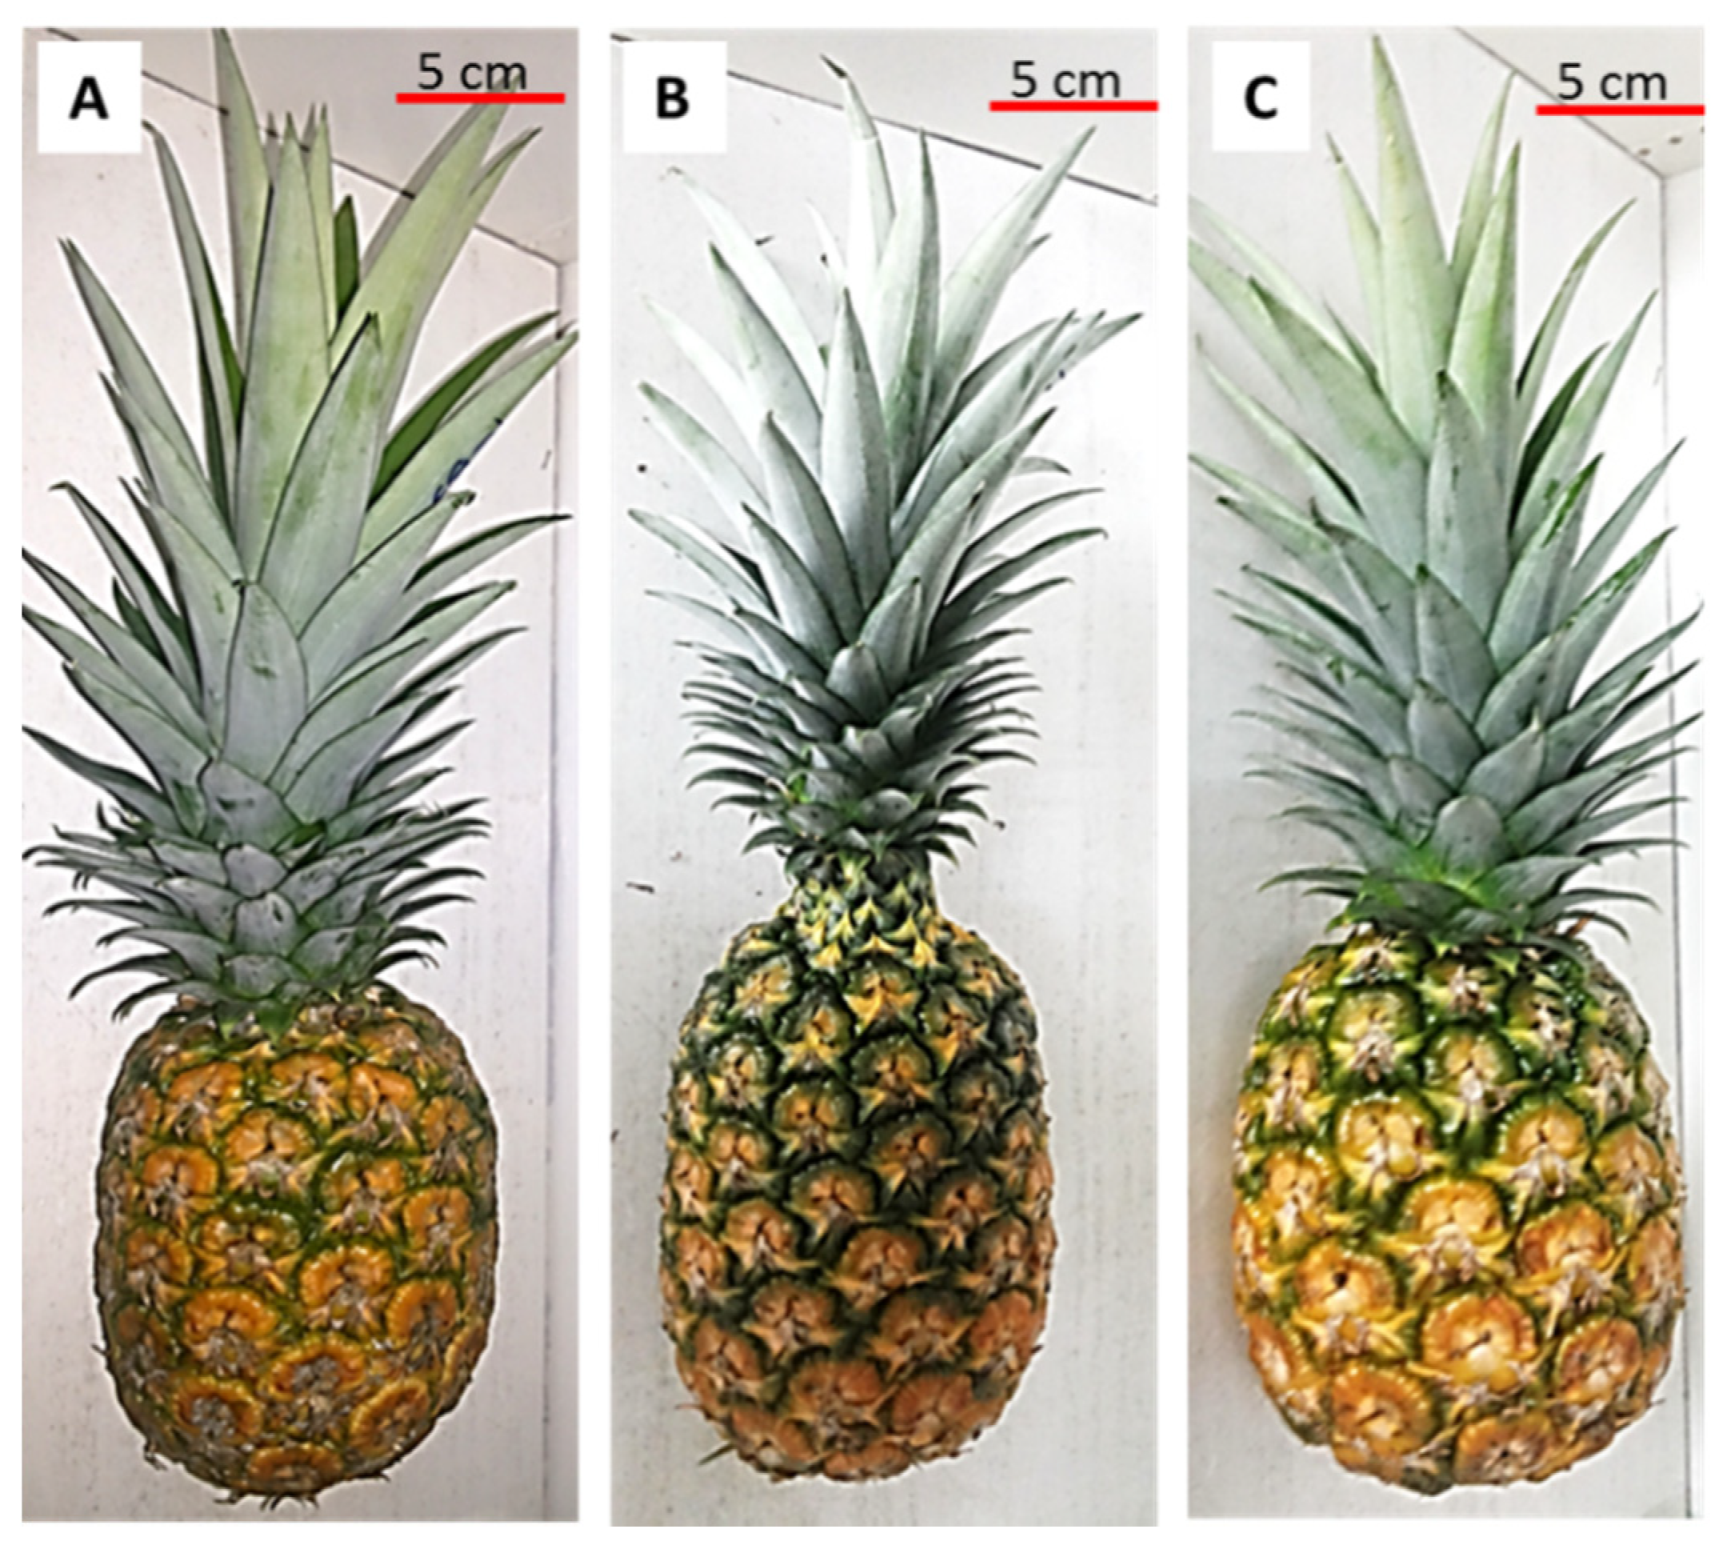 Agronomy | Free Full-Text | Effect of Vermicompost on Growth, Plant  Nutrient Uptake and Bioactivity of Ex Vitro Pineapple (Ananas comosus var.  MD2) | HTML